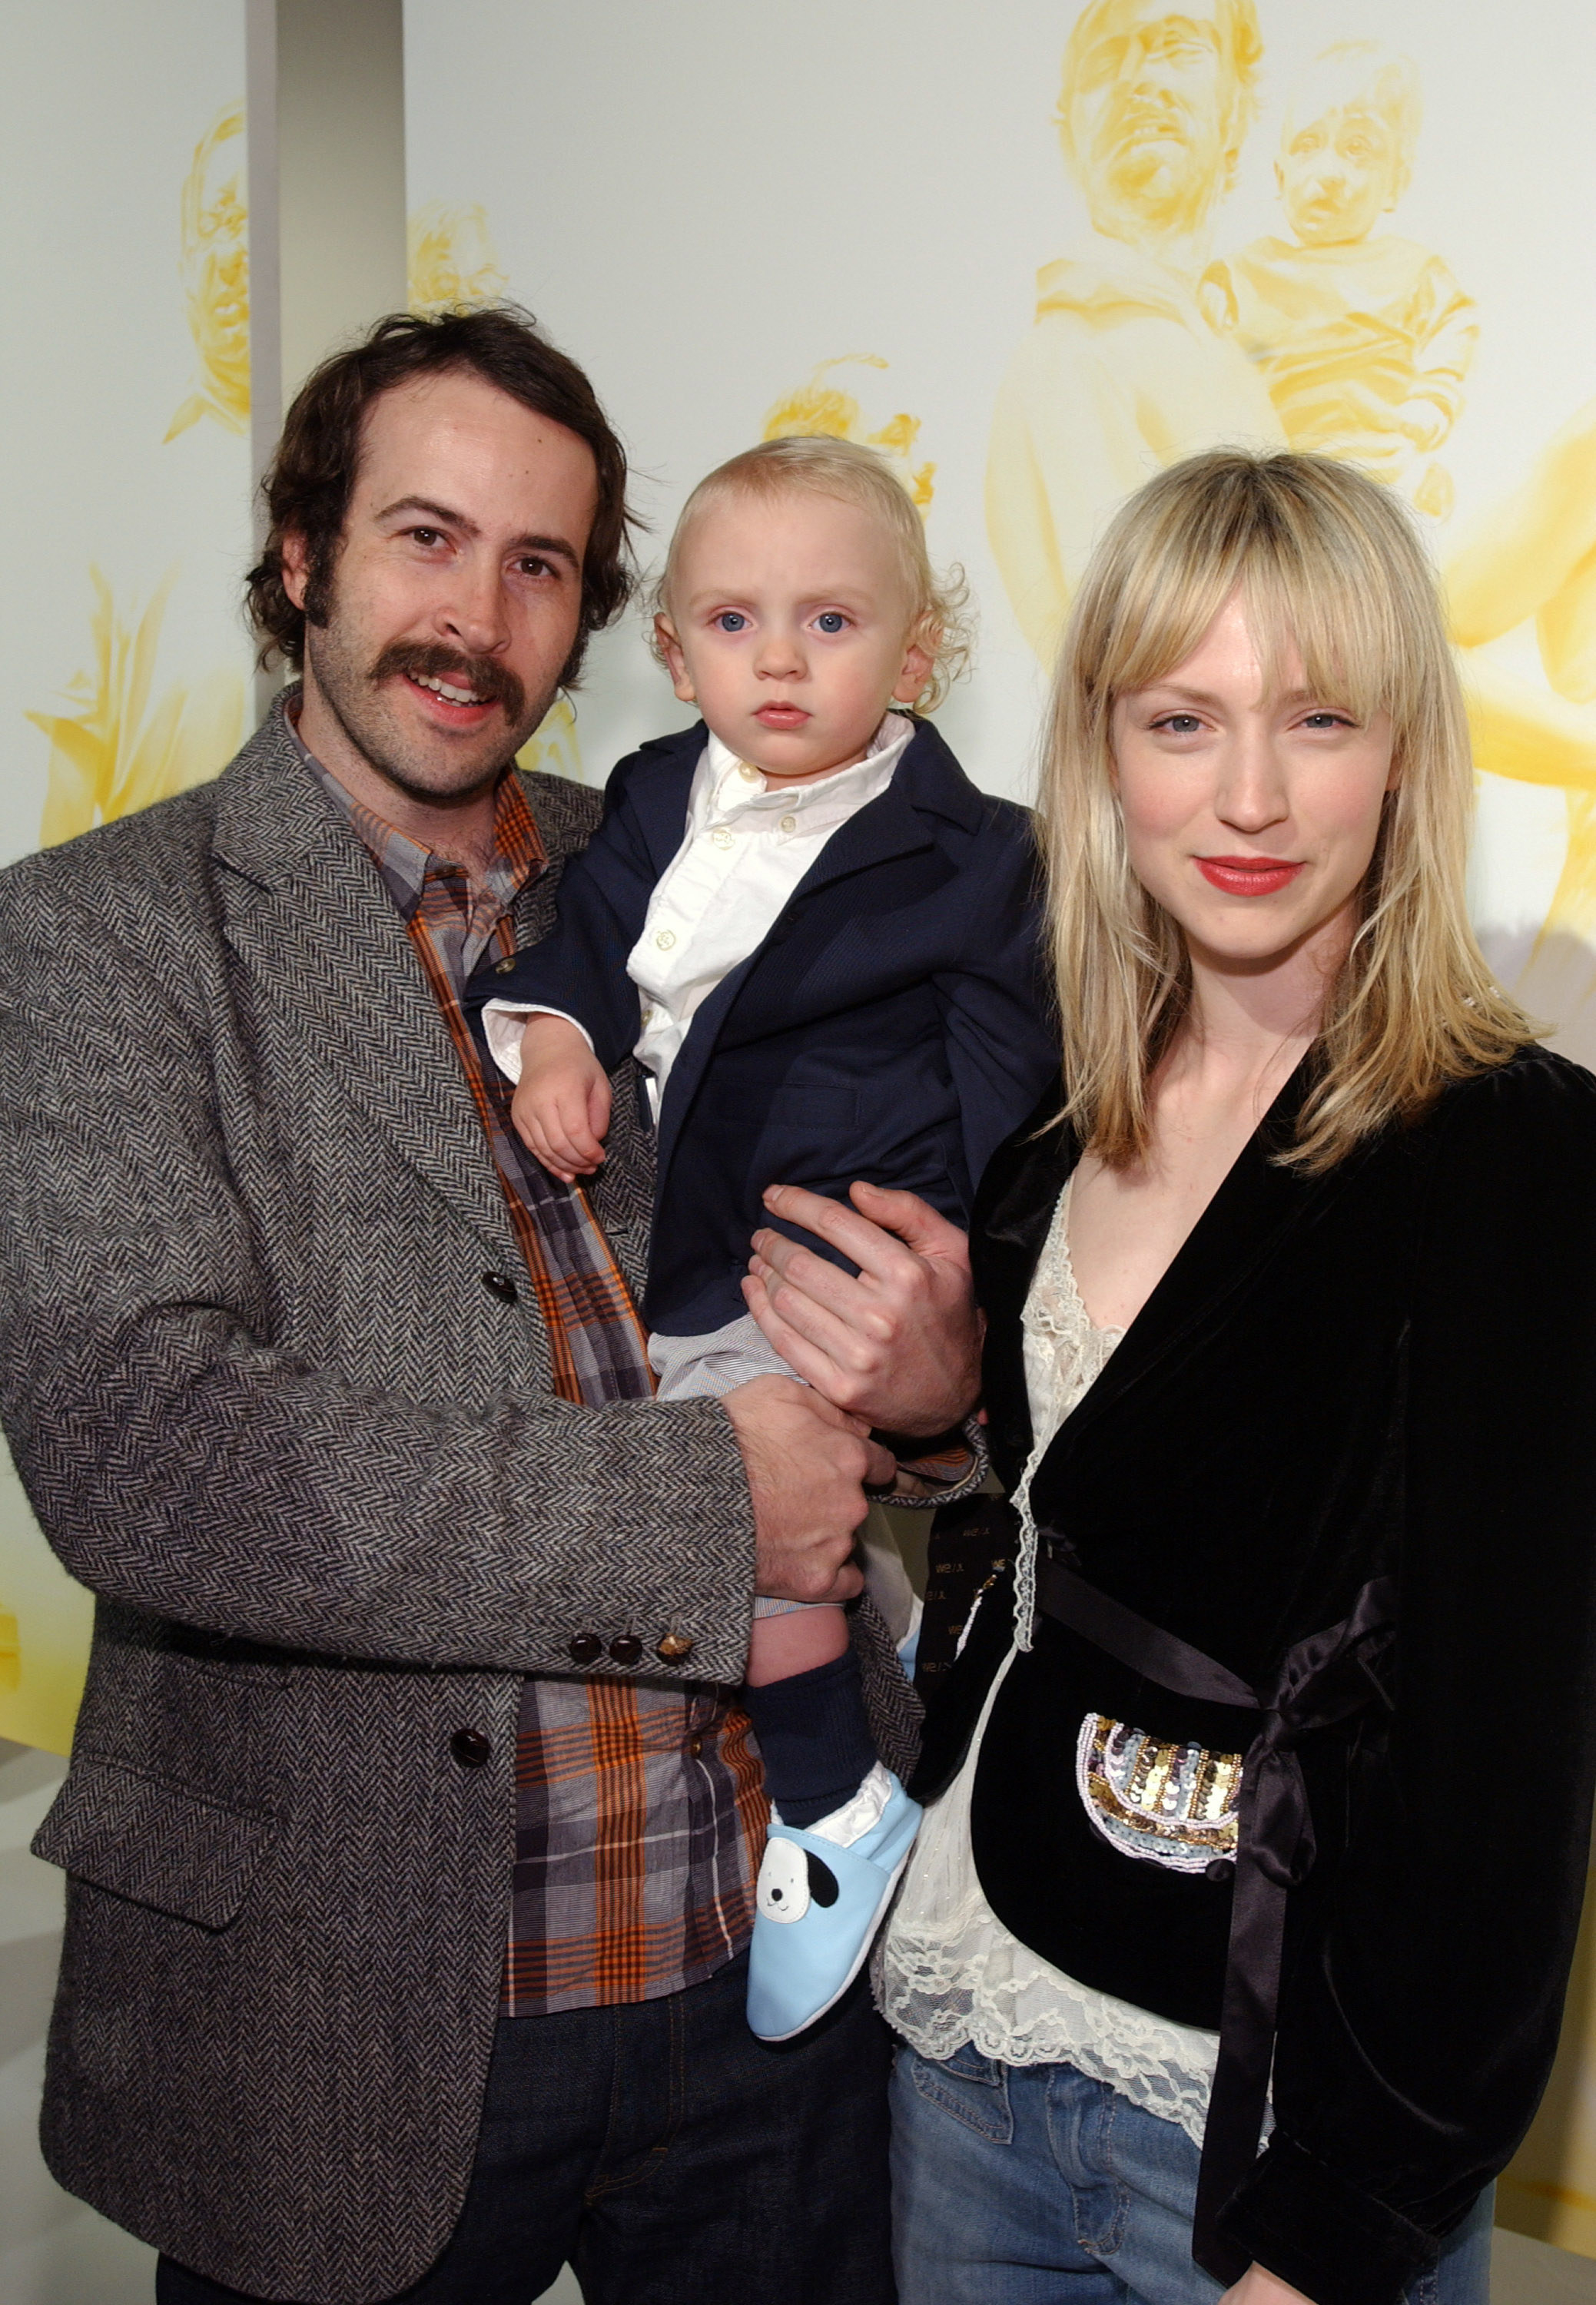 Jason Lee holding son Pilot Inspektor and posing with wife Beth Riesgraf